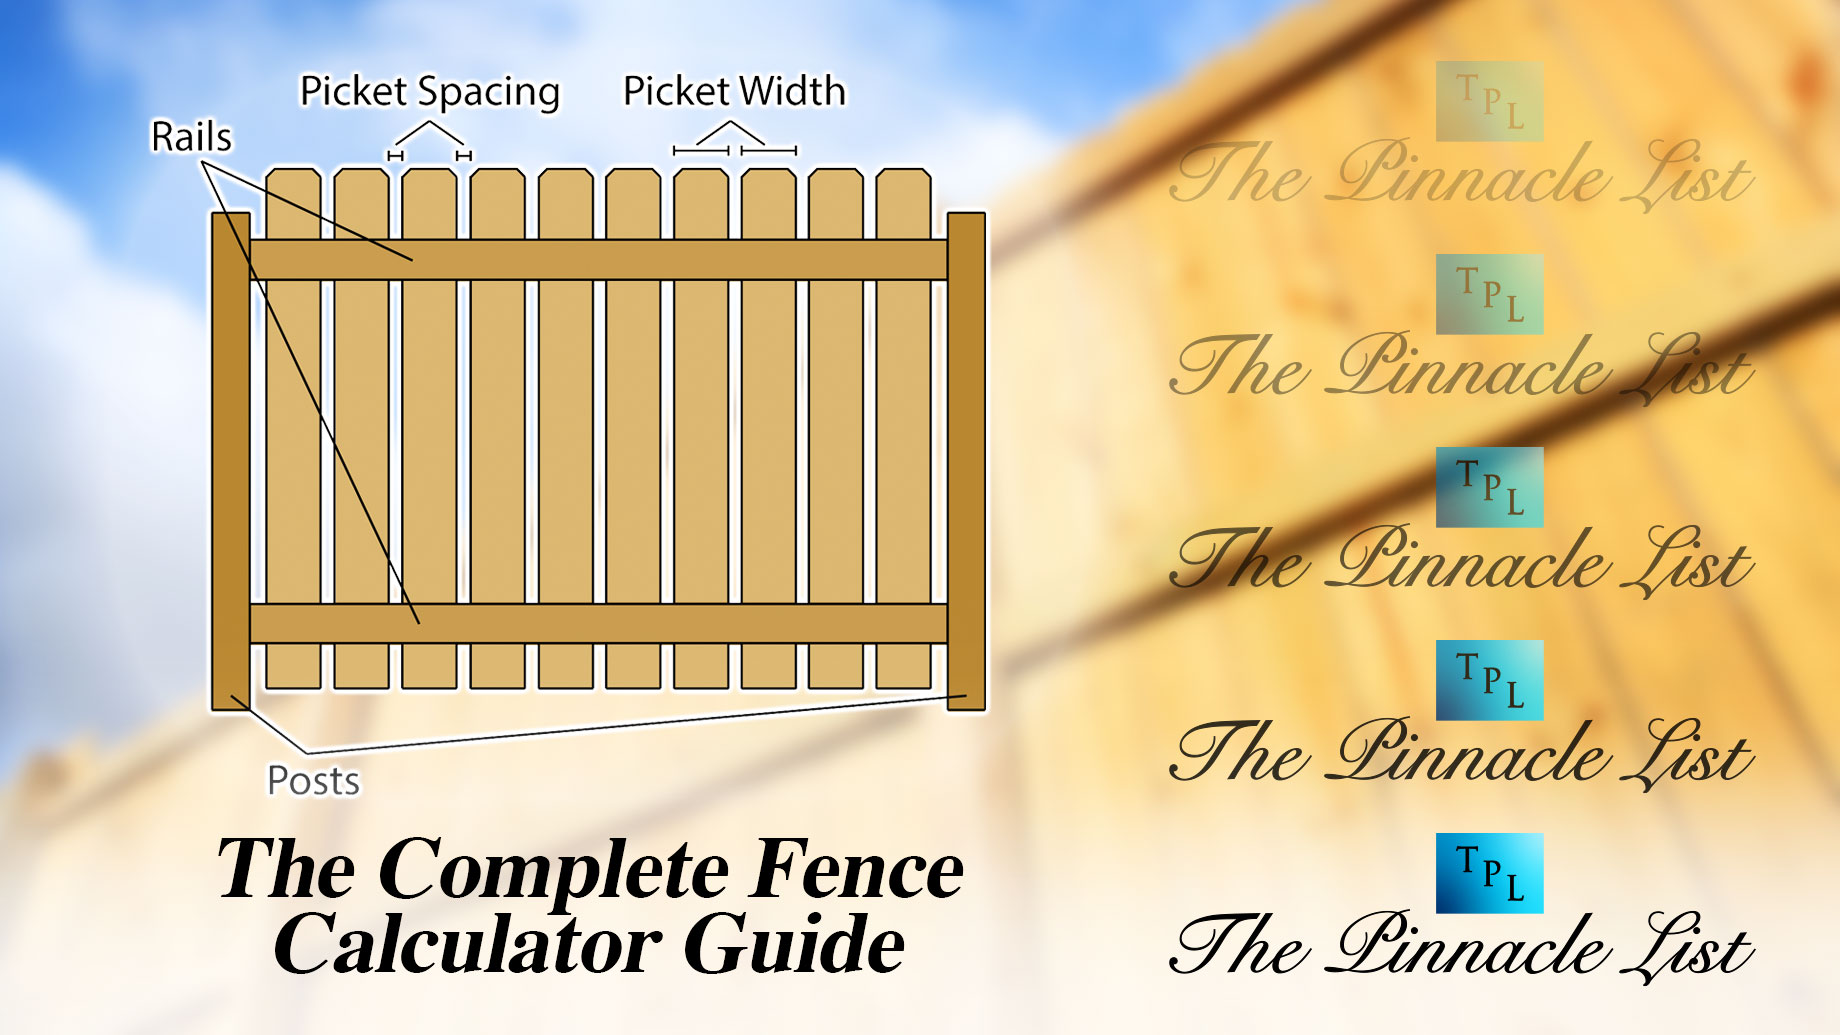 The Complete Fence Calculator Guide